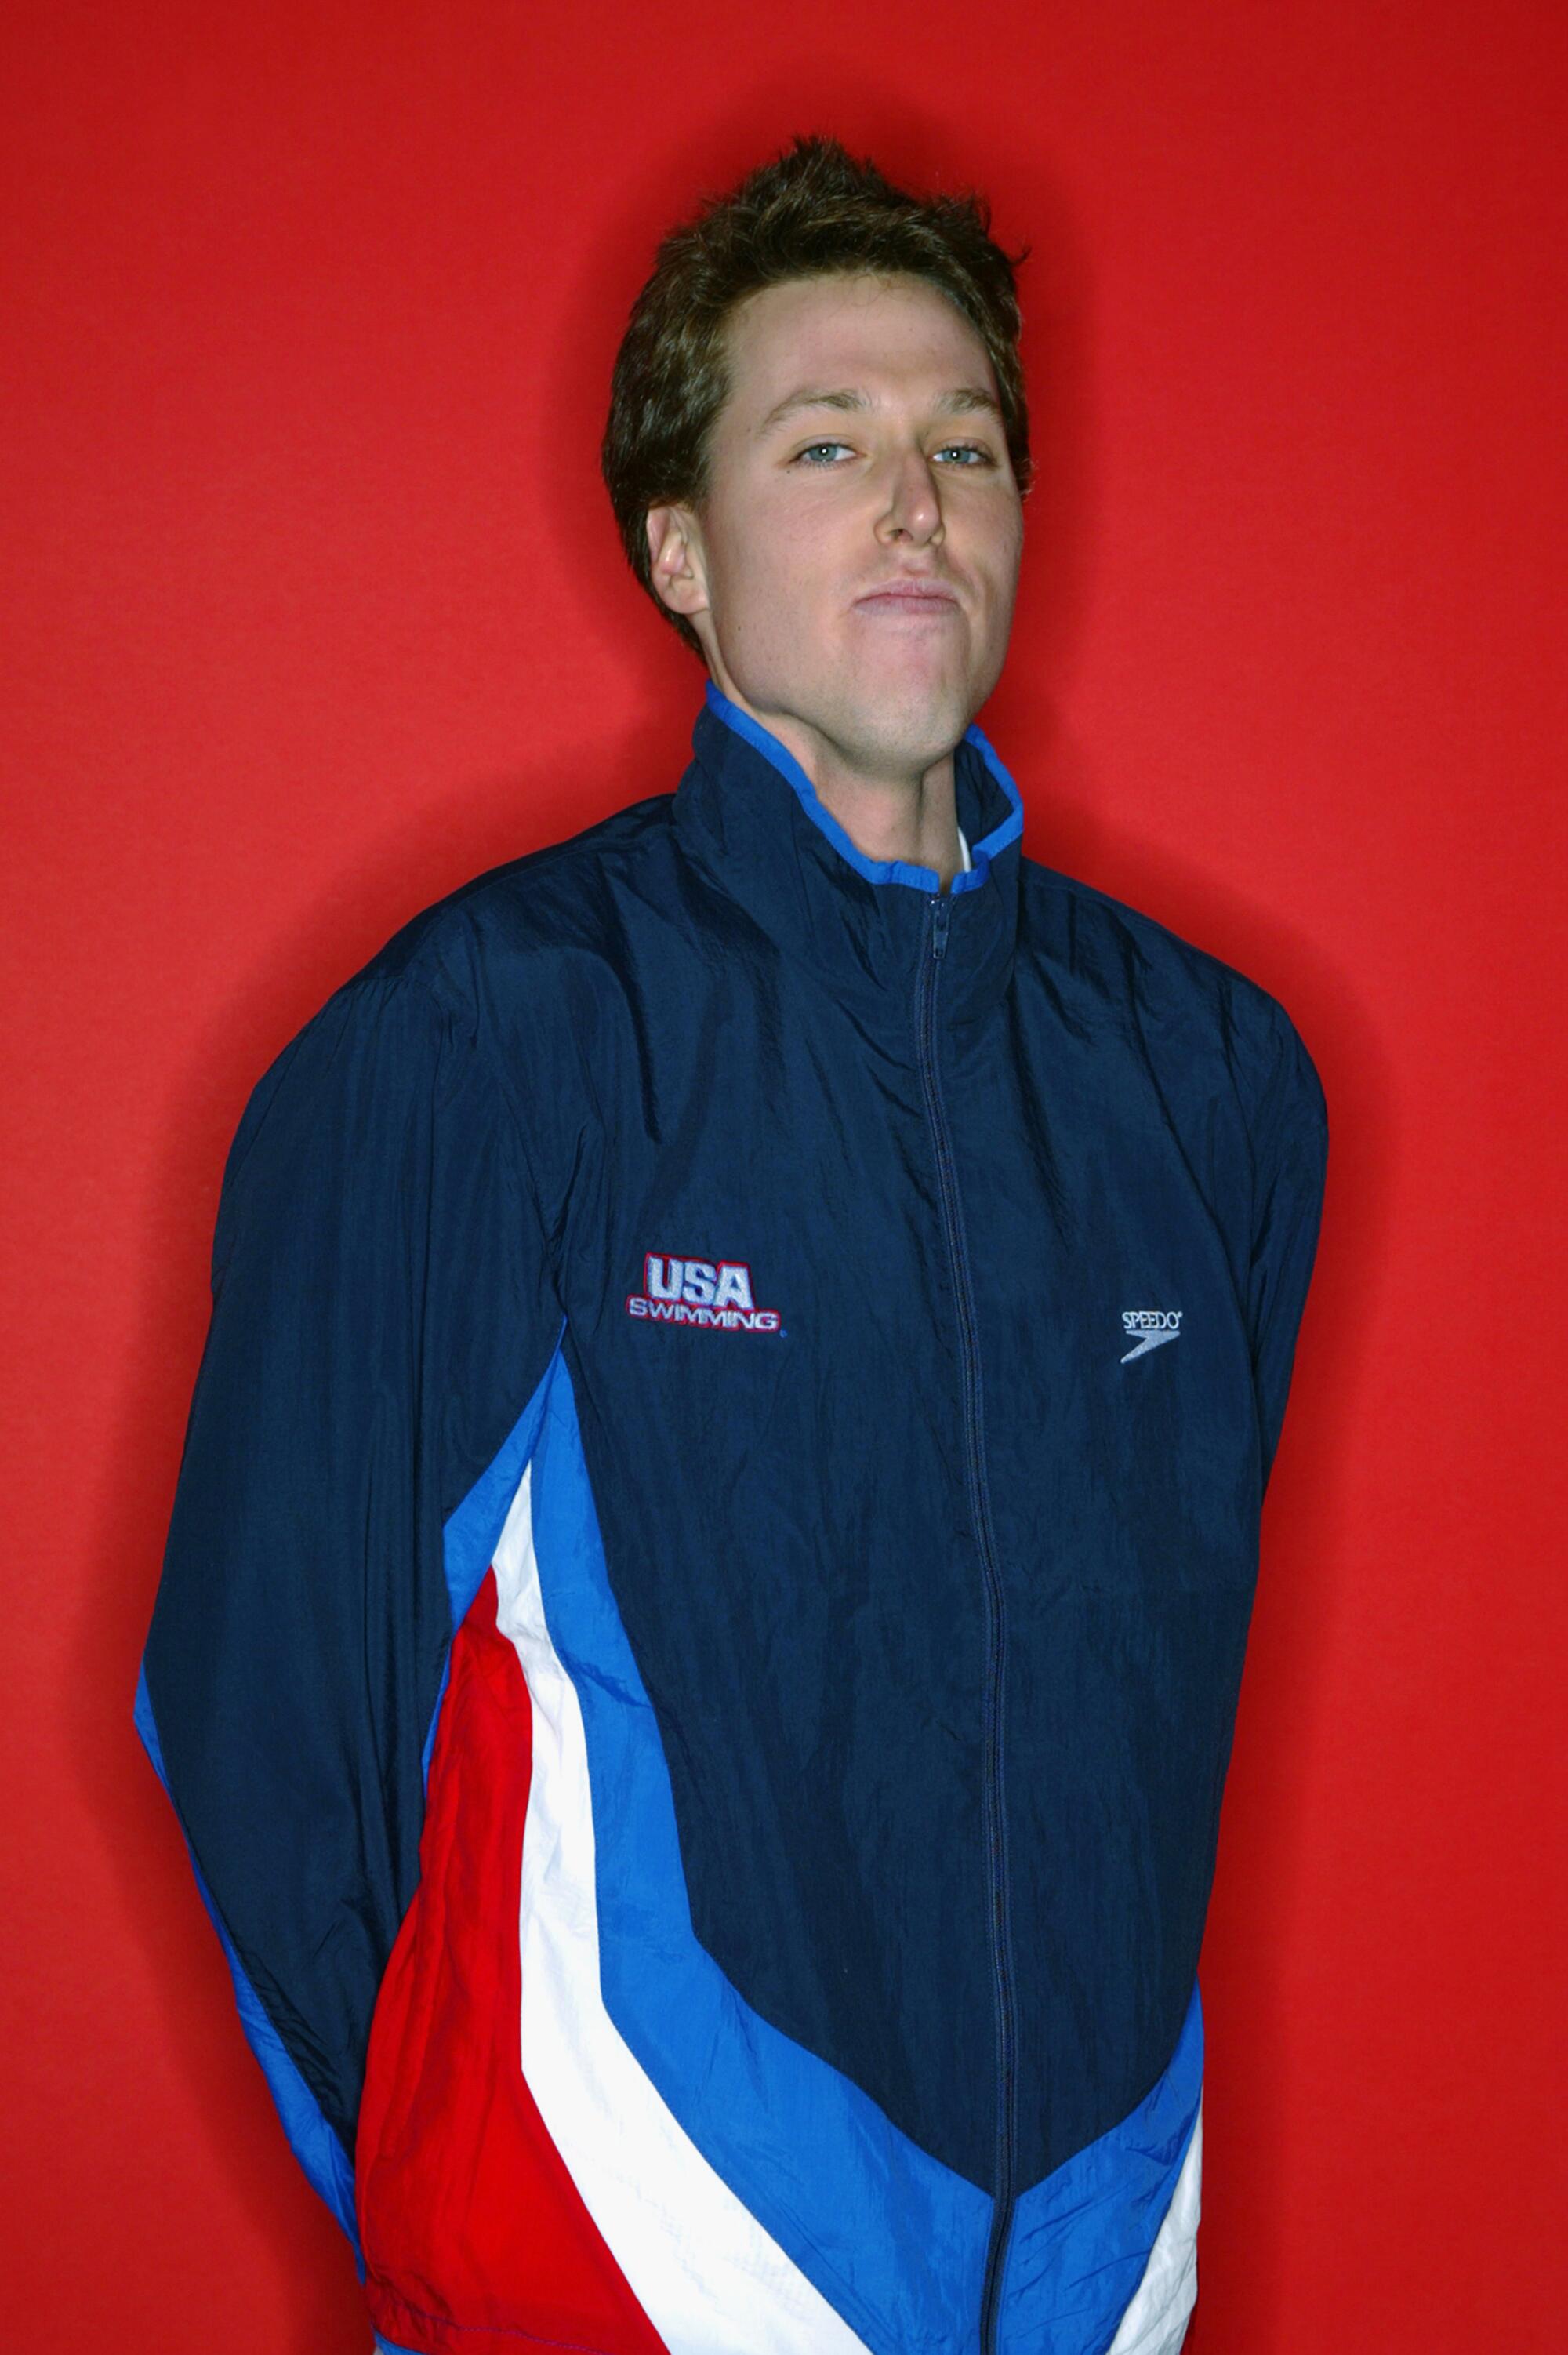 Klete Keller in a USA outfit stands before a red background